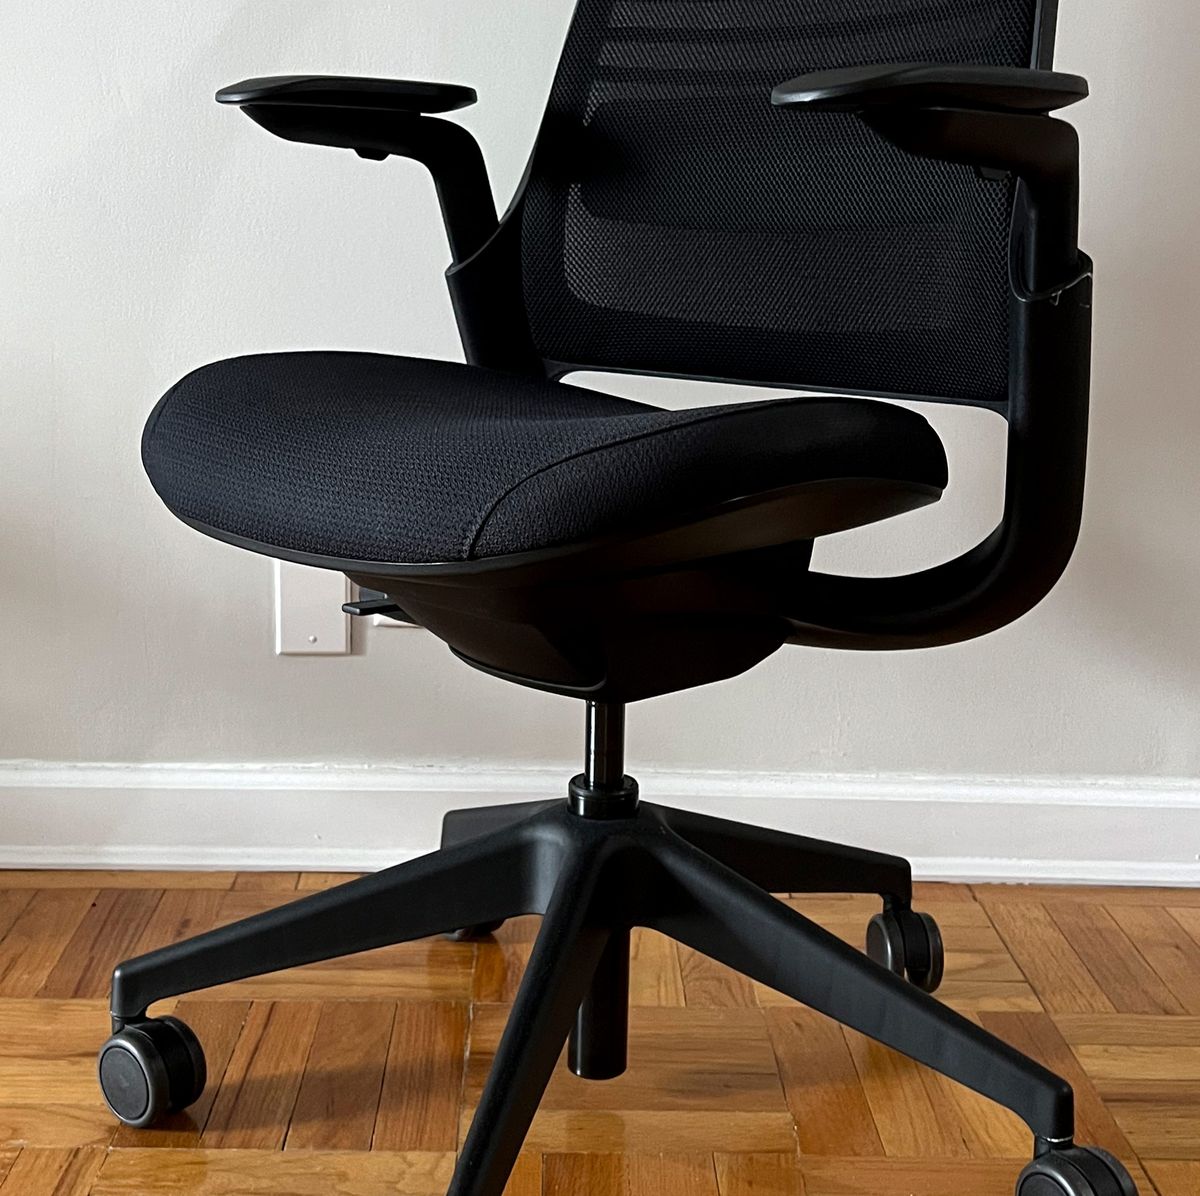 Steelcase Series 1 Review: The Best Office Chair Money Can Buy